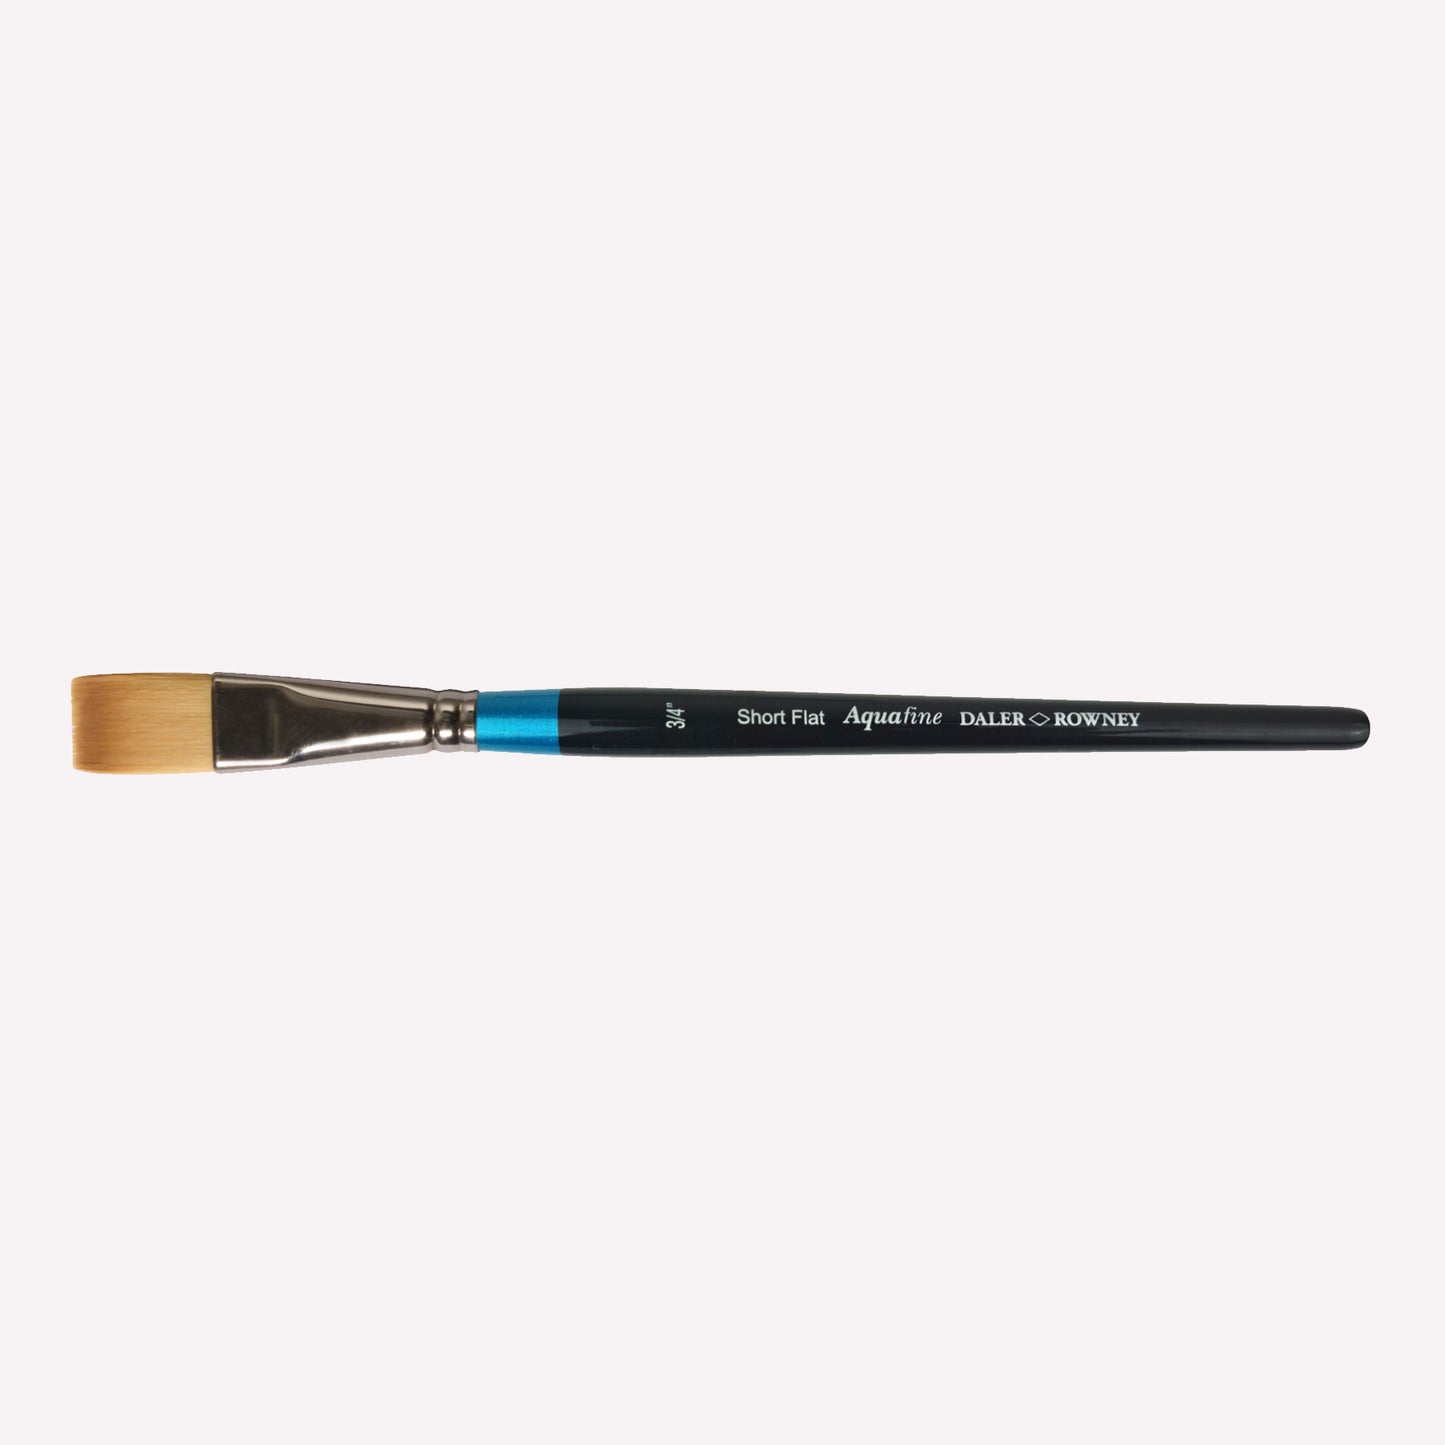 Daler Rowney Aquafine Short Flat Paintbrush in size 3/4”. This flat, square-shaped brush is ideal for painting broad, clean strokes with watercolour. Brushes have a classy black handle with blue detailing and a silver ferrule.